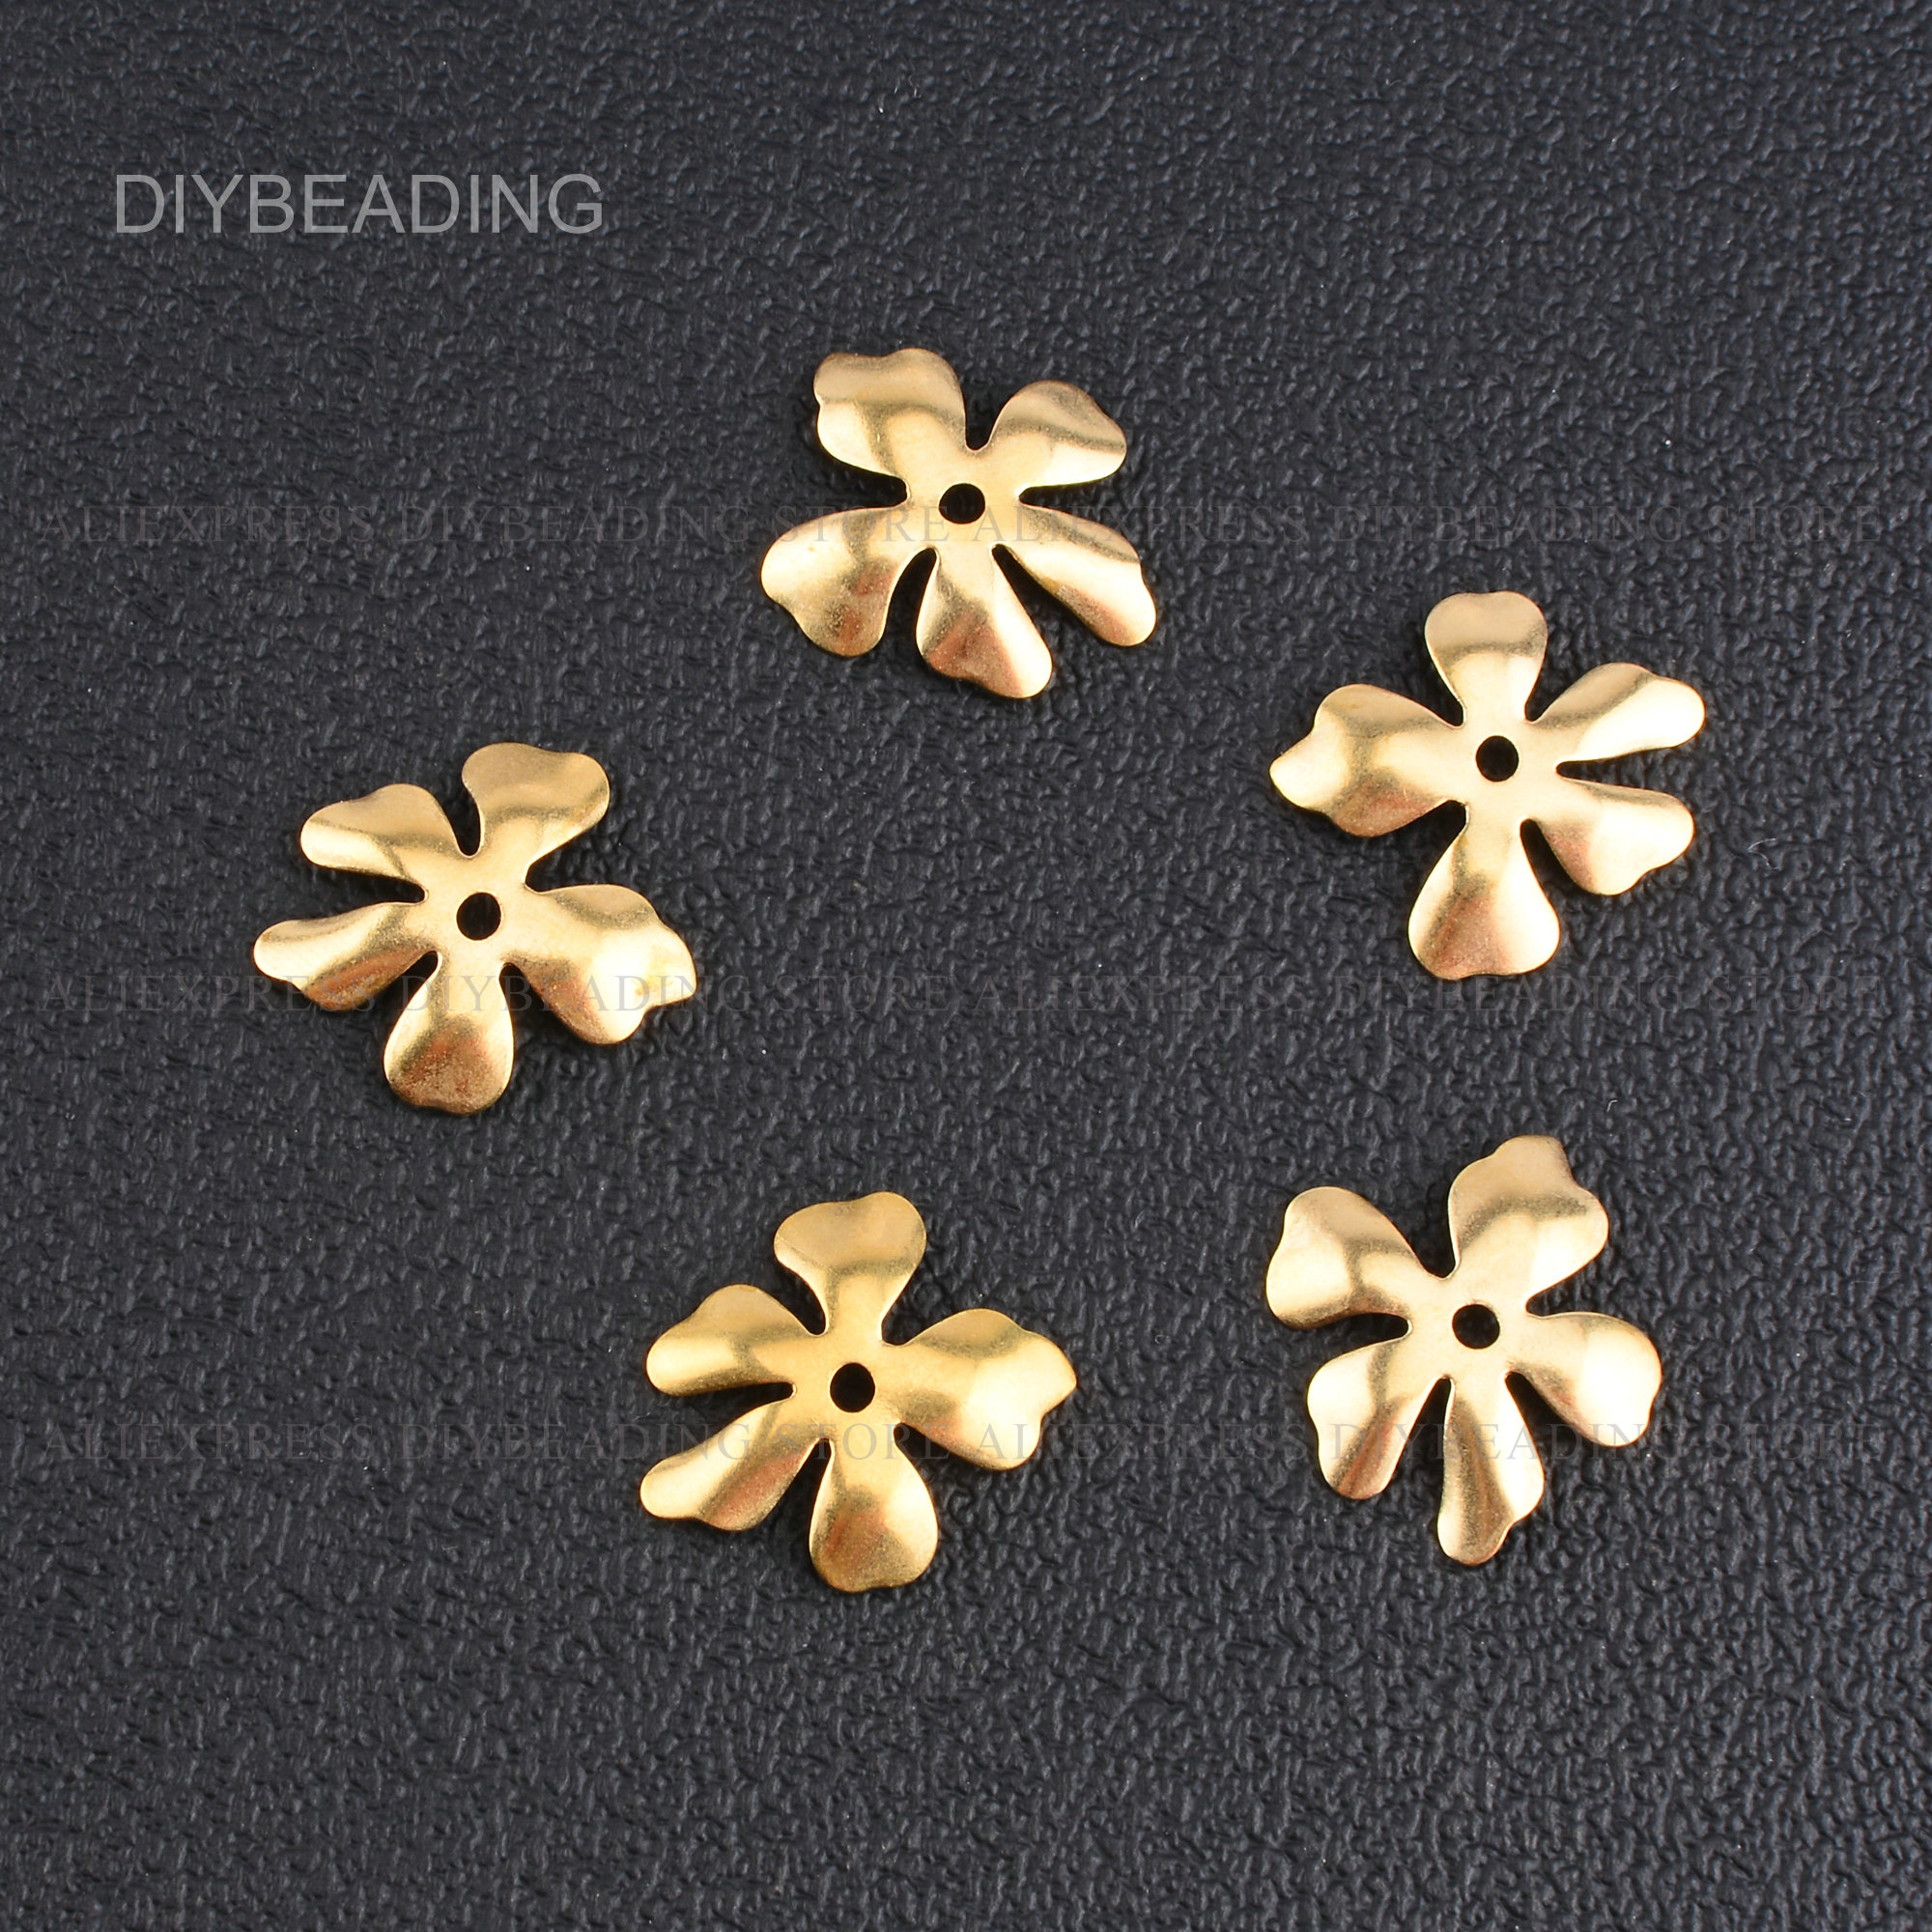 10-500 Pcs Metal Saucer Beads Online Bulk Wholesale Large Size Brass Flower End Caps Finding for Jewelry Making Supplies